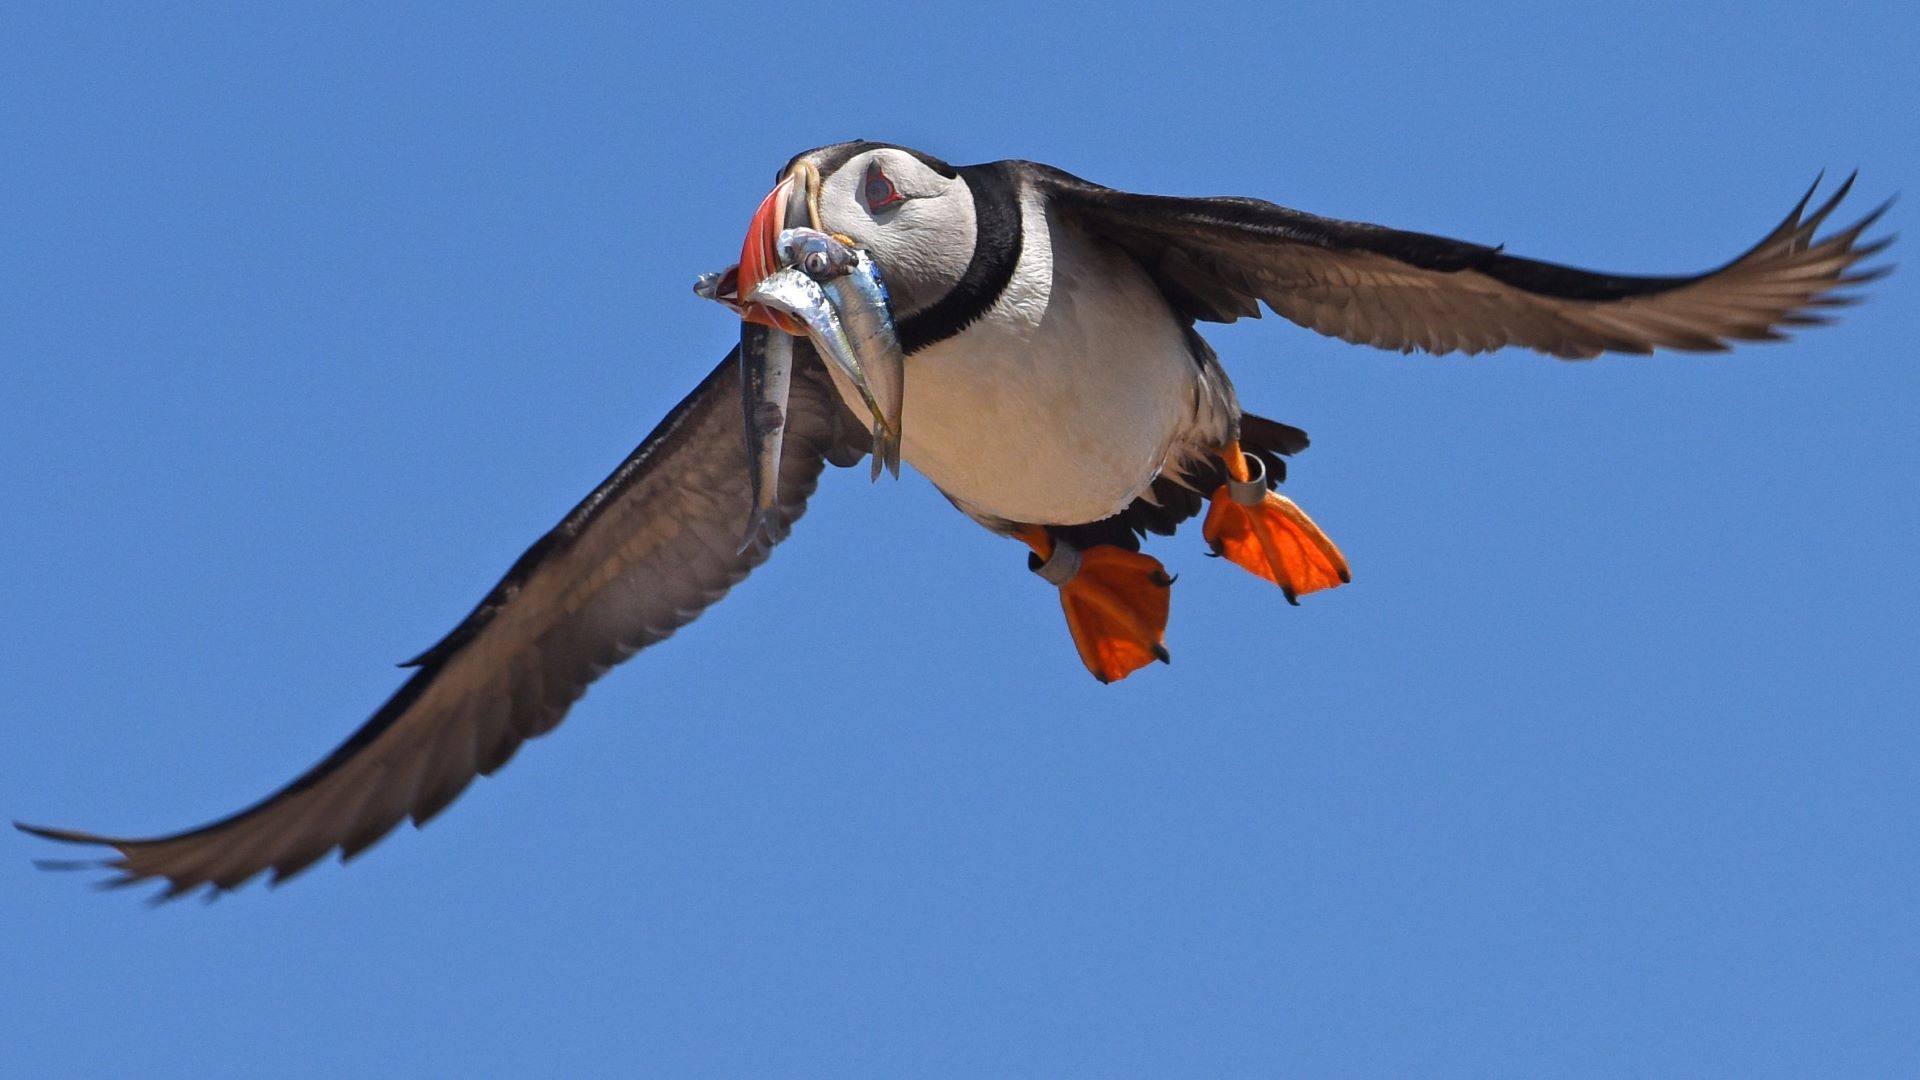 Steve Kress shares lessons from a lifetime of puffin protection